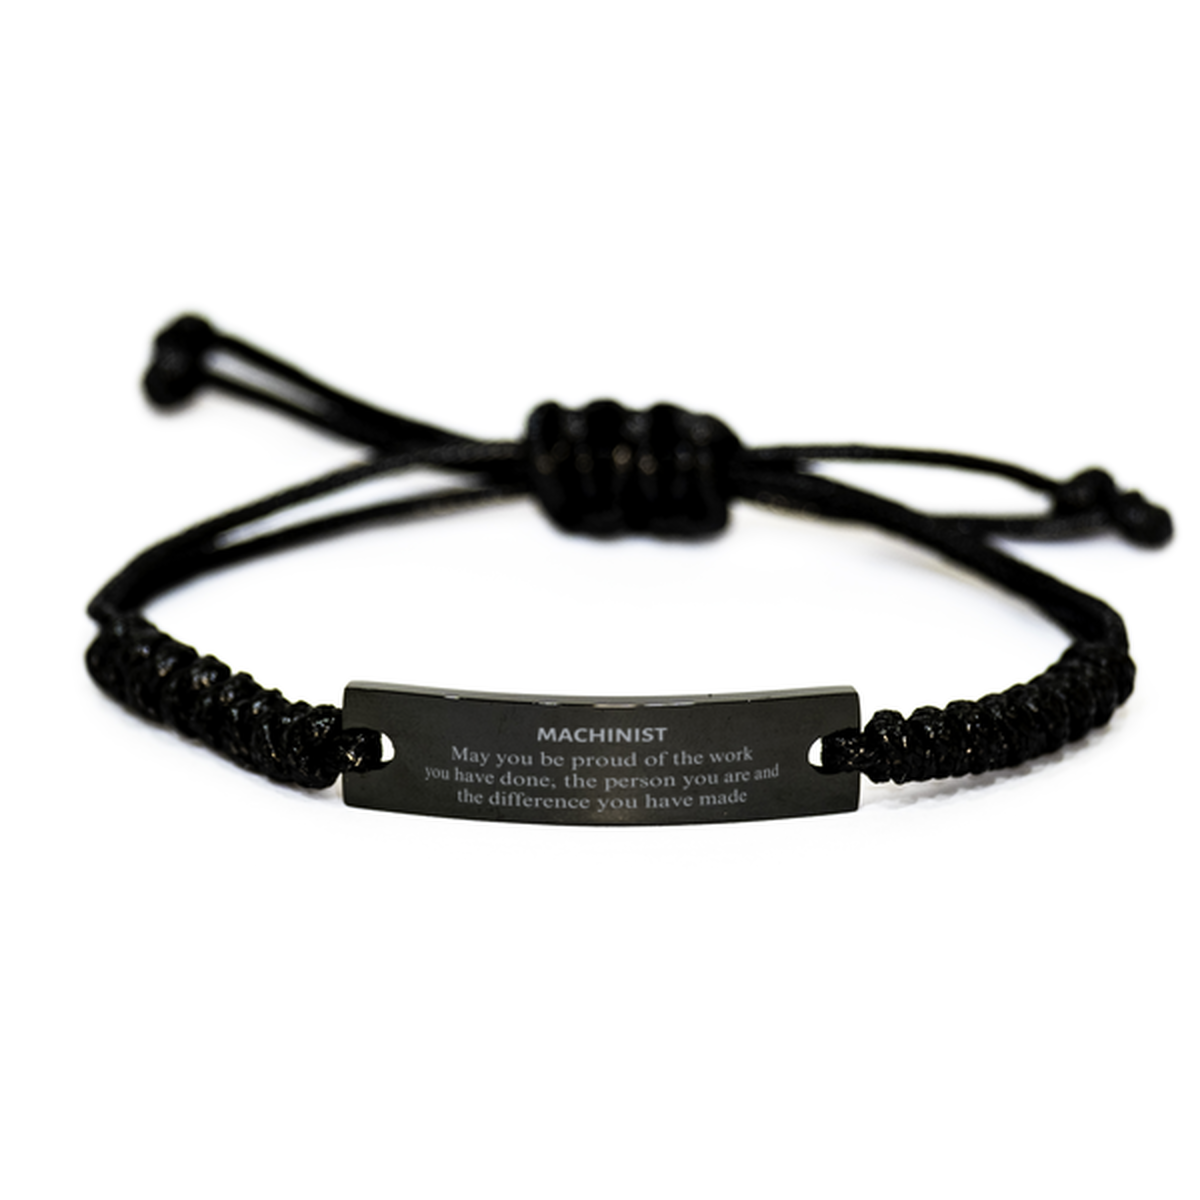 Machinist May you be proud of the work you have done, Retirement Machinist Black Rope Bracelet for Colleague Appreciation Gifts Amazing for Machinist